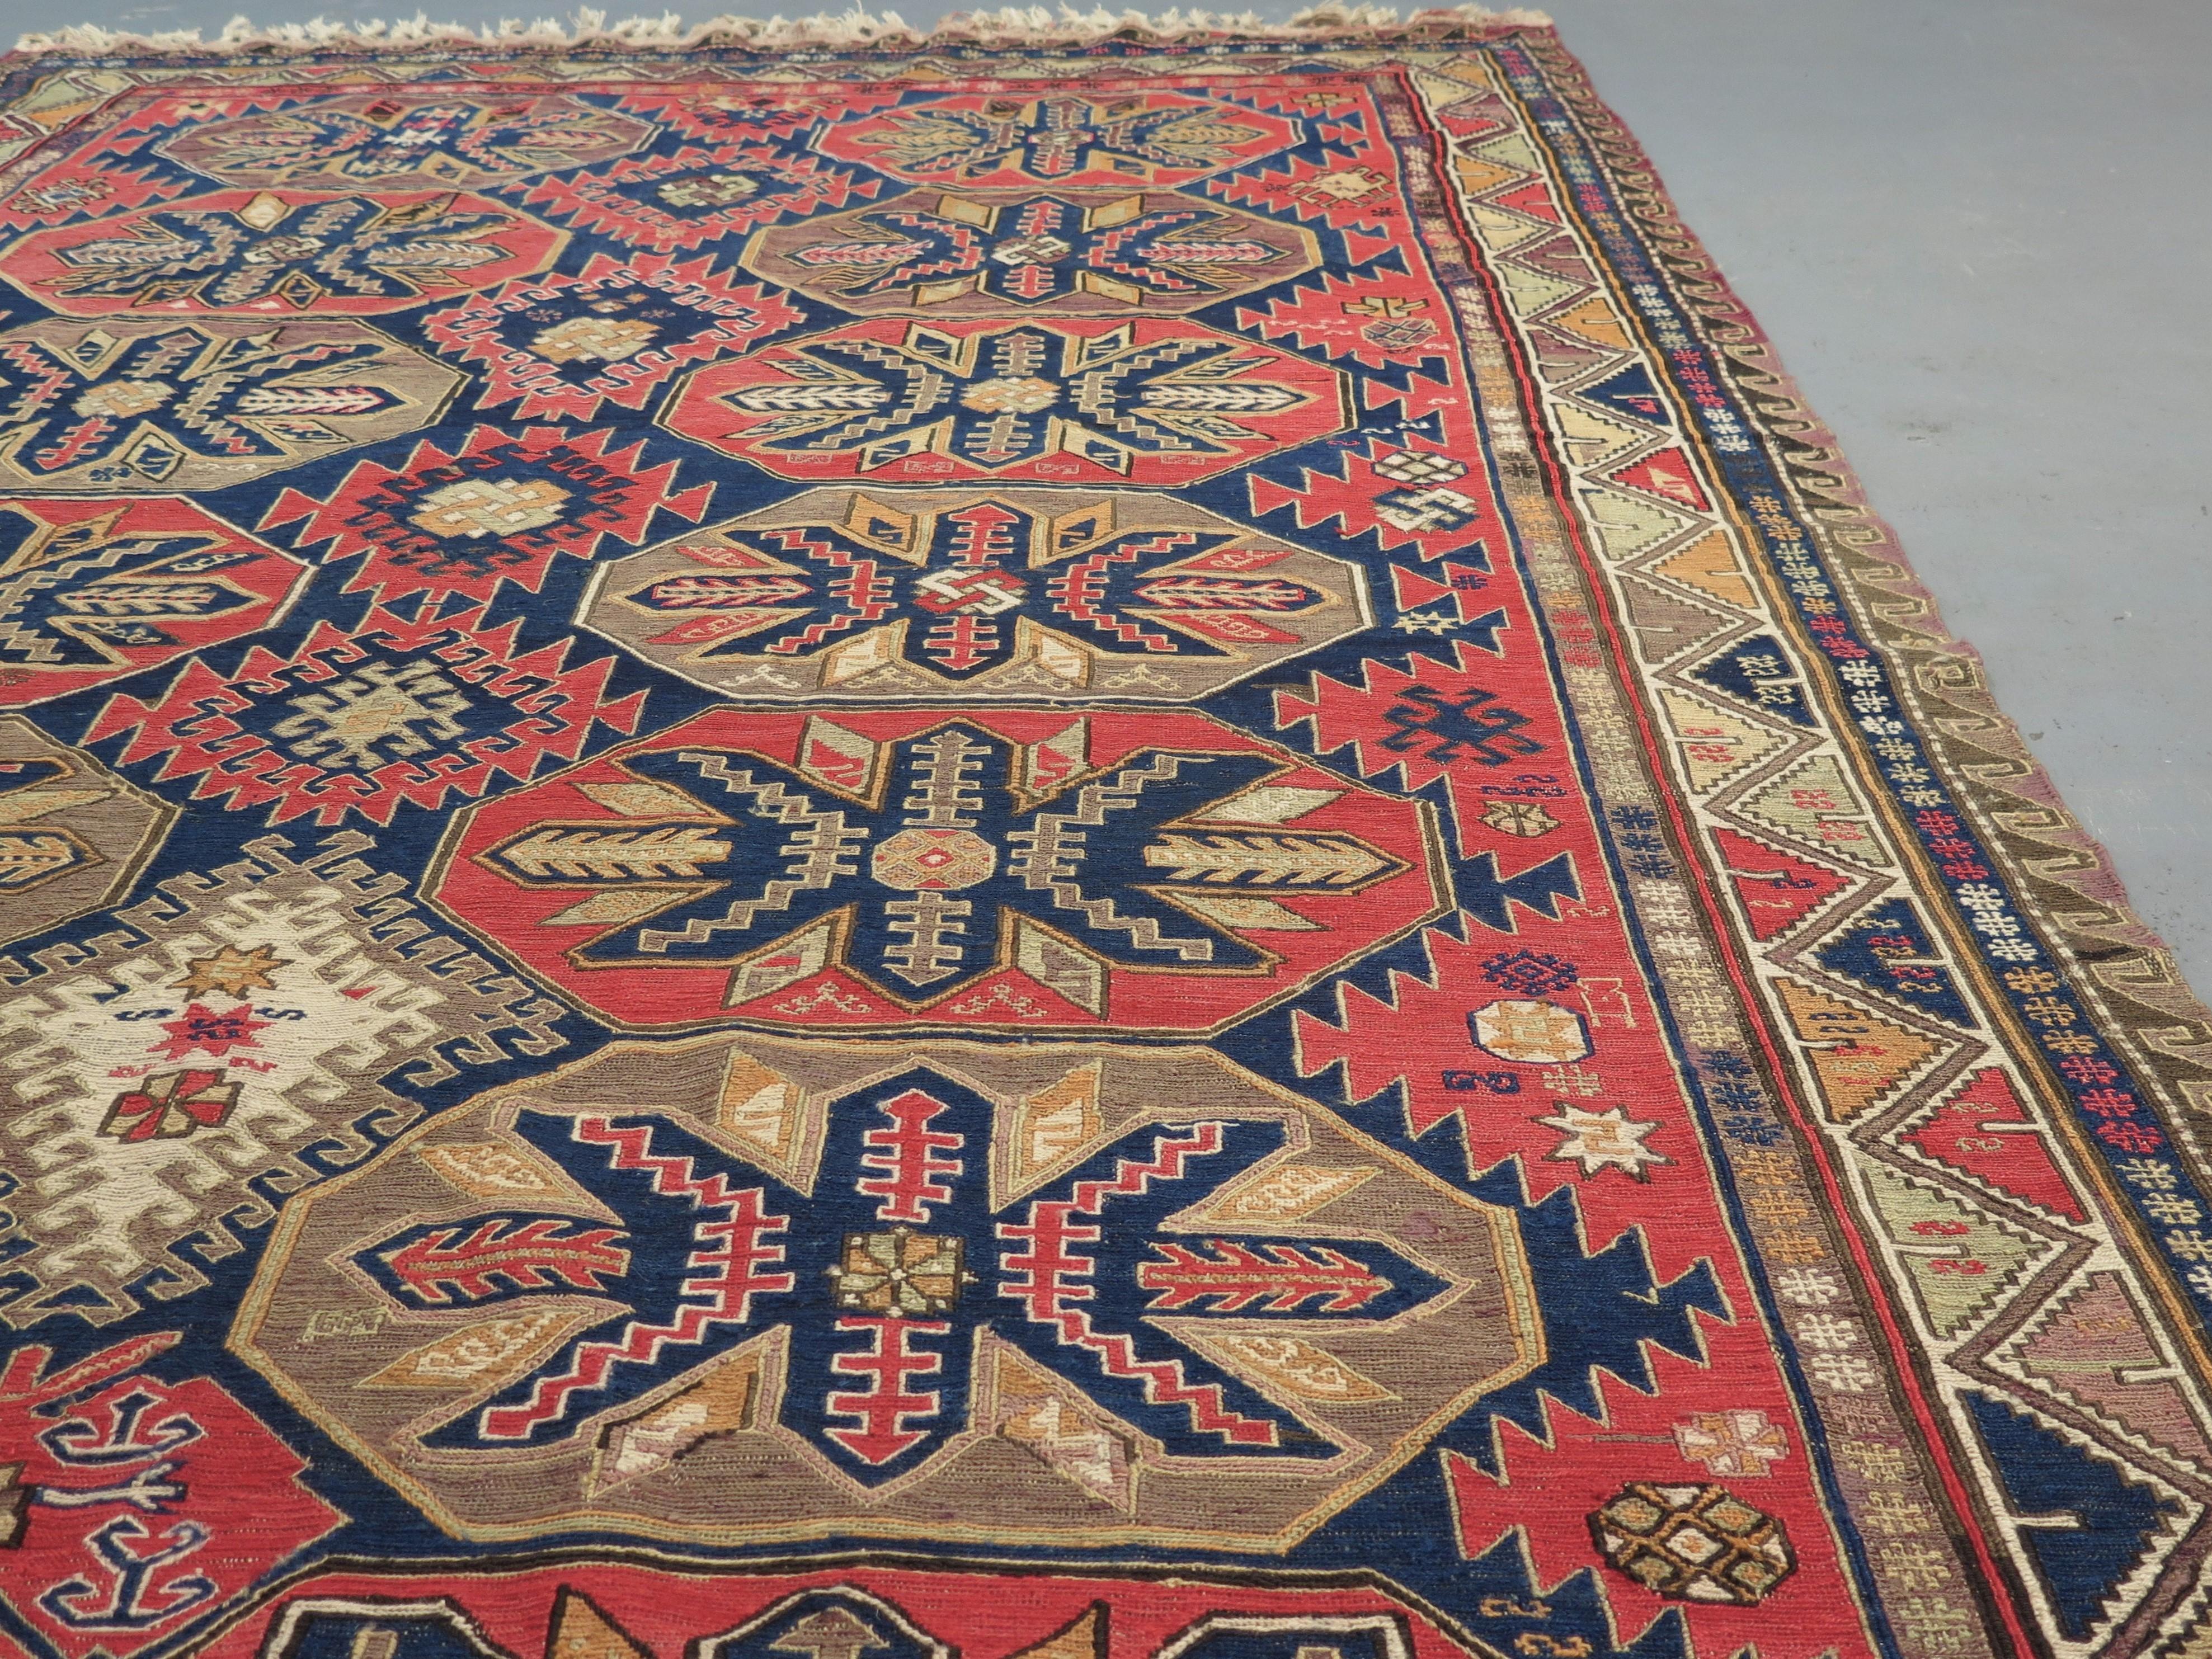 Antique Soumac flatweaves from the Caucasus are exceptionally durable: stronger and longer lasting than kilims. These pieces are extraordinarily finely woven, showcasing richly detailed motifs, borrowed from ancient tribal symbols native to the